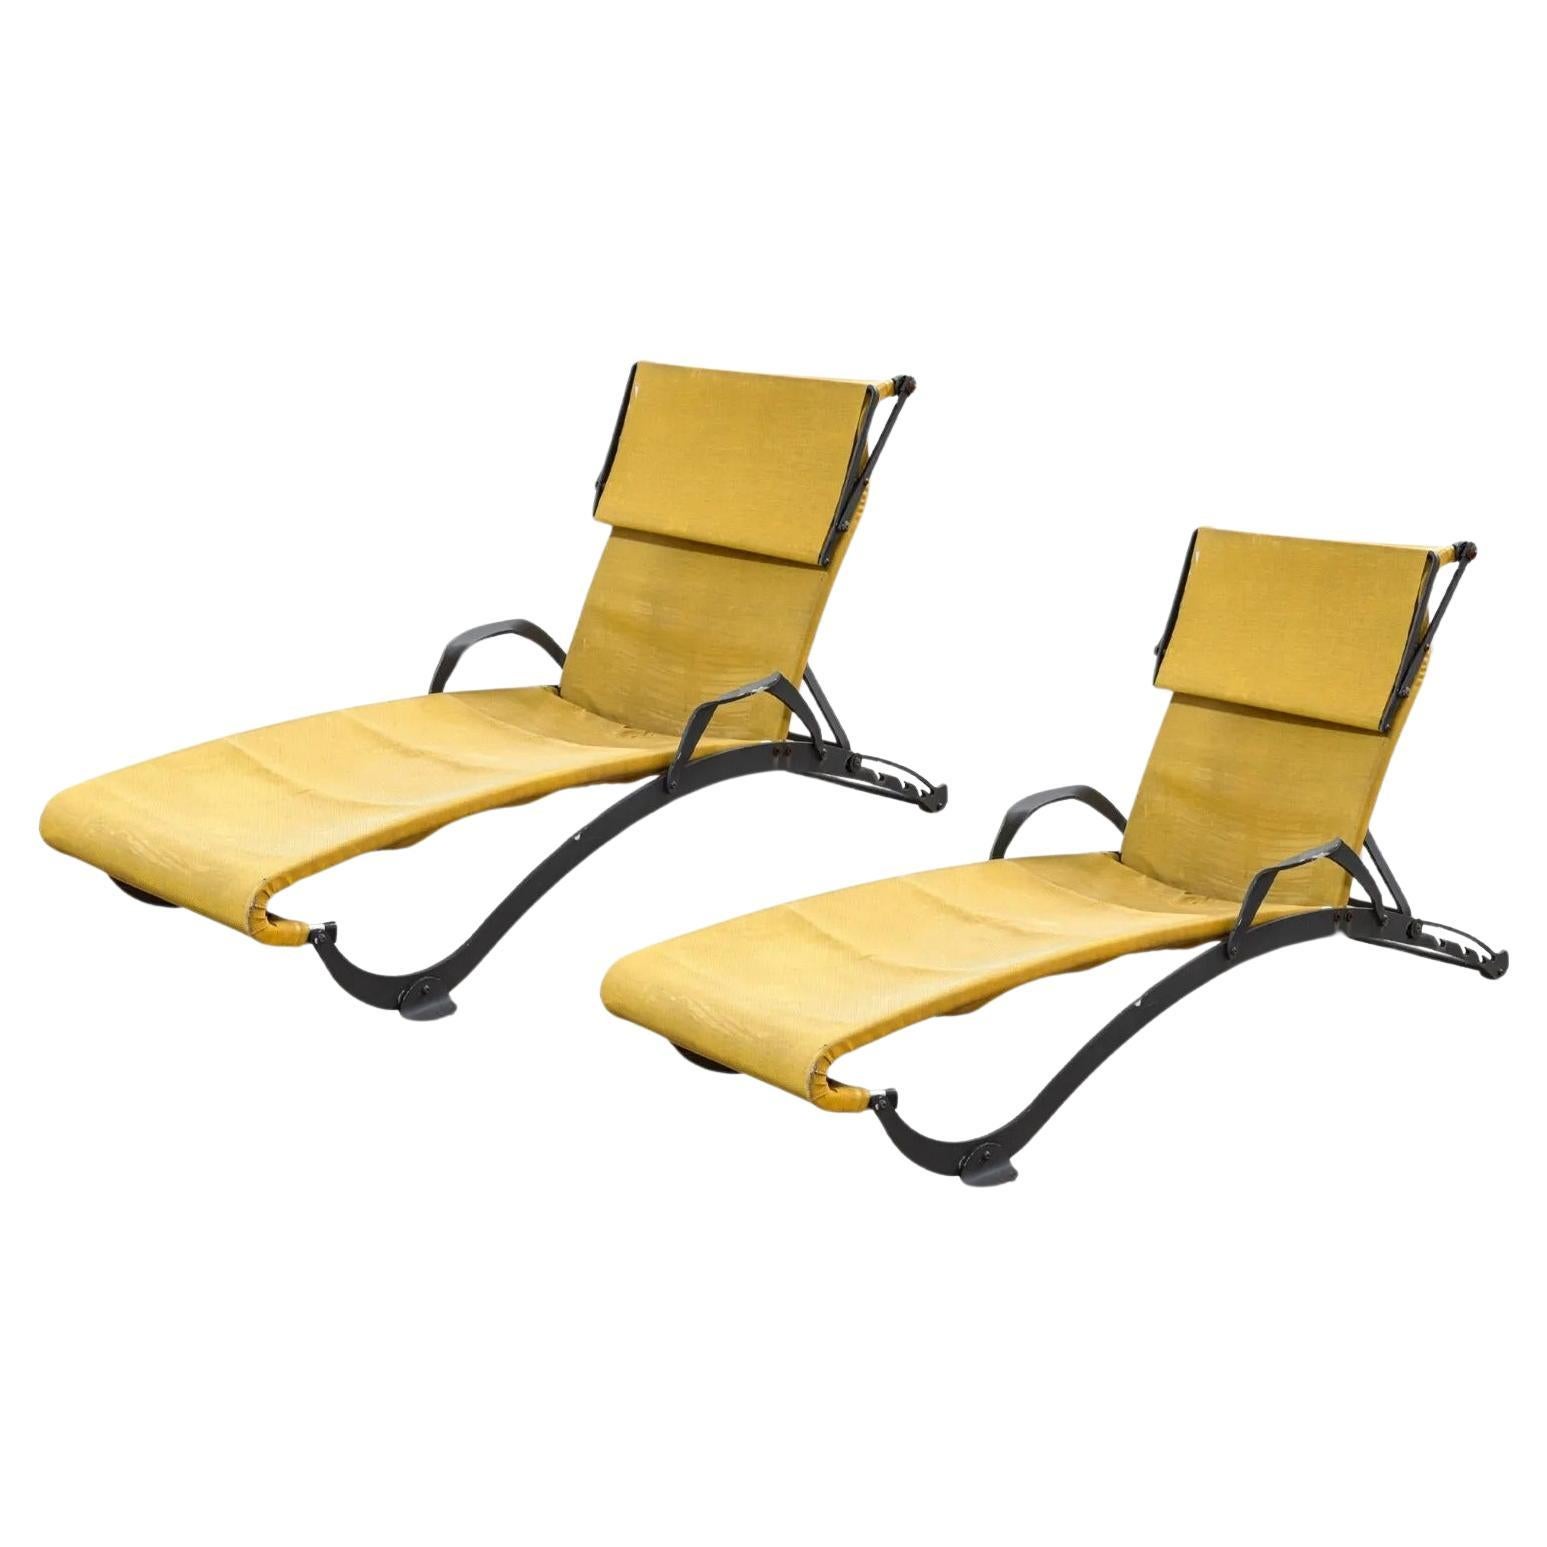 5 Stars Italy Patio Adjustable Reclining Sun-friendly Lounge Chairs Mid Century For Sale